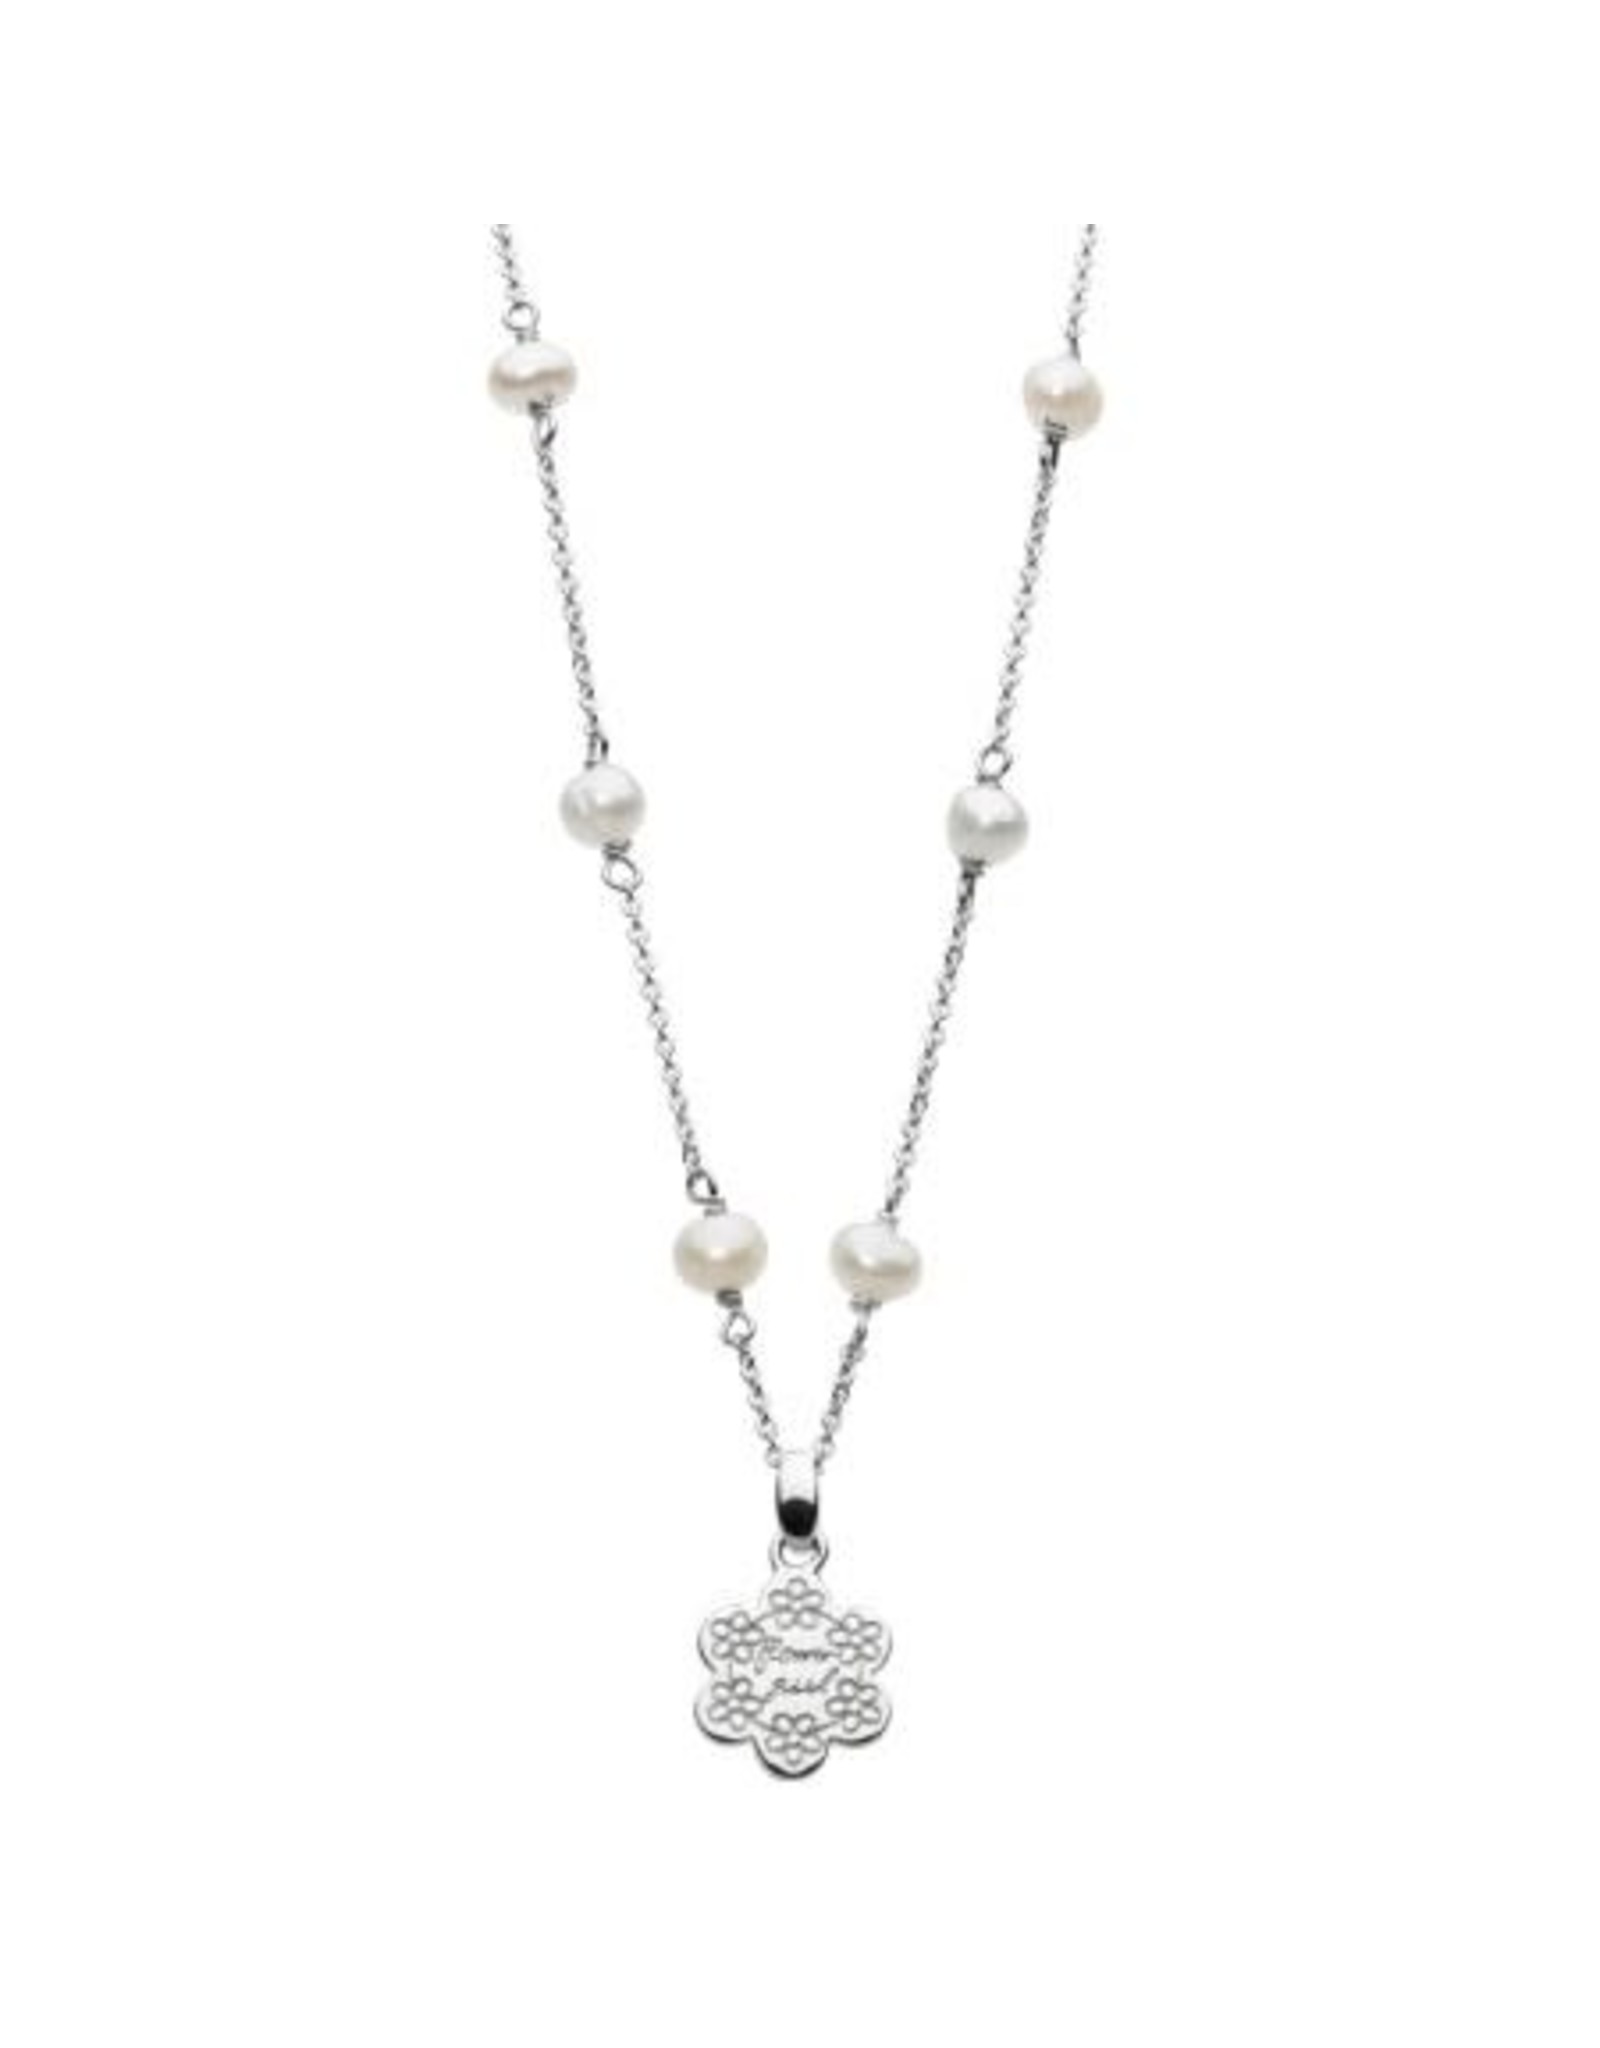 Girls Silver Flower Girl Necklace with Freshwater Pearl Details, 14" - 16"